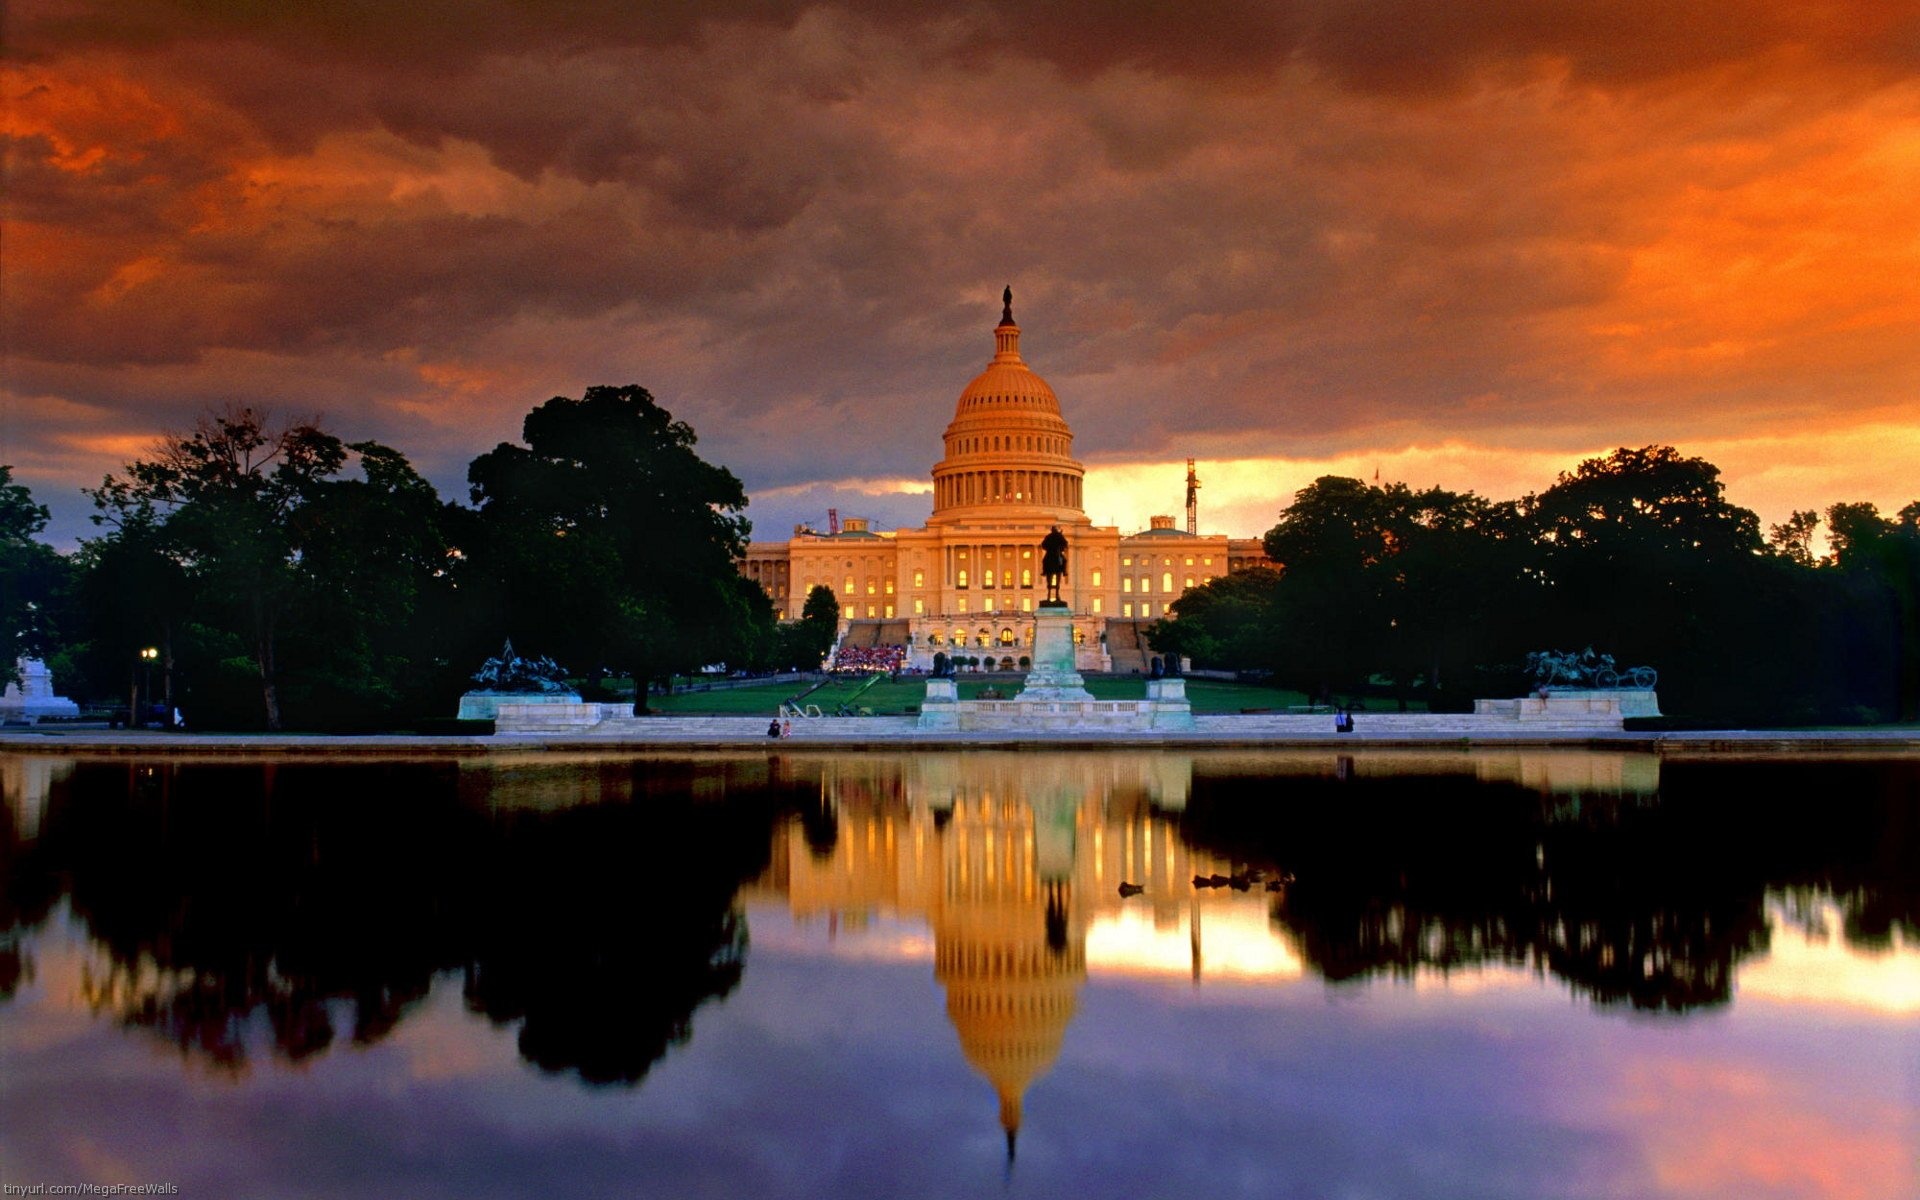 Washington, D.C.: The home of the Legislative Branch of the United States federal government and seat of the United States Congress. 1920x1200 HD Wallpaper.